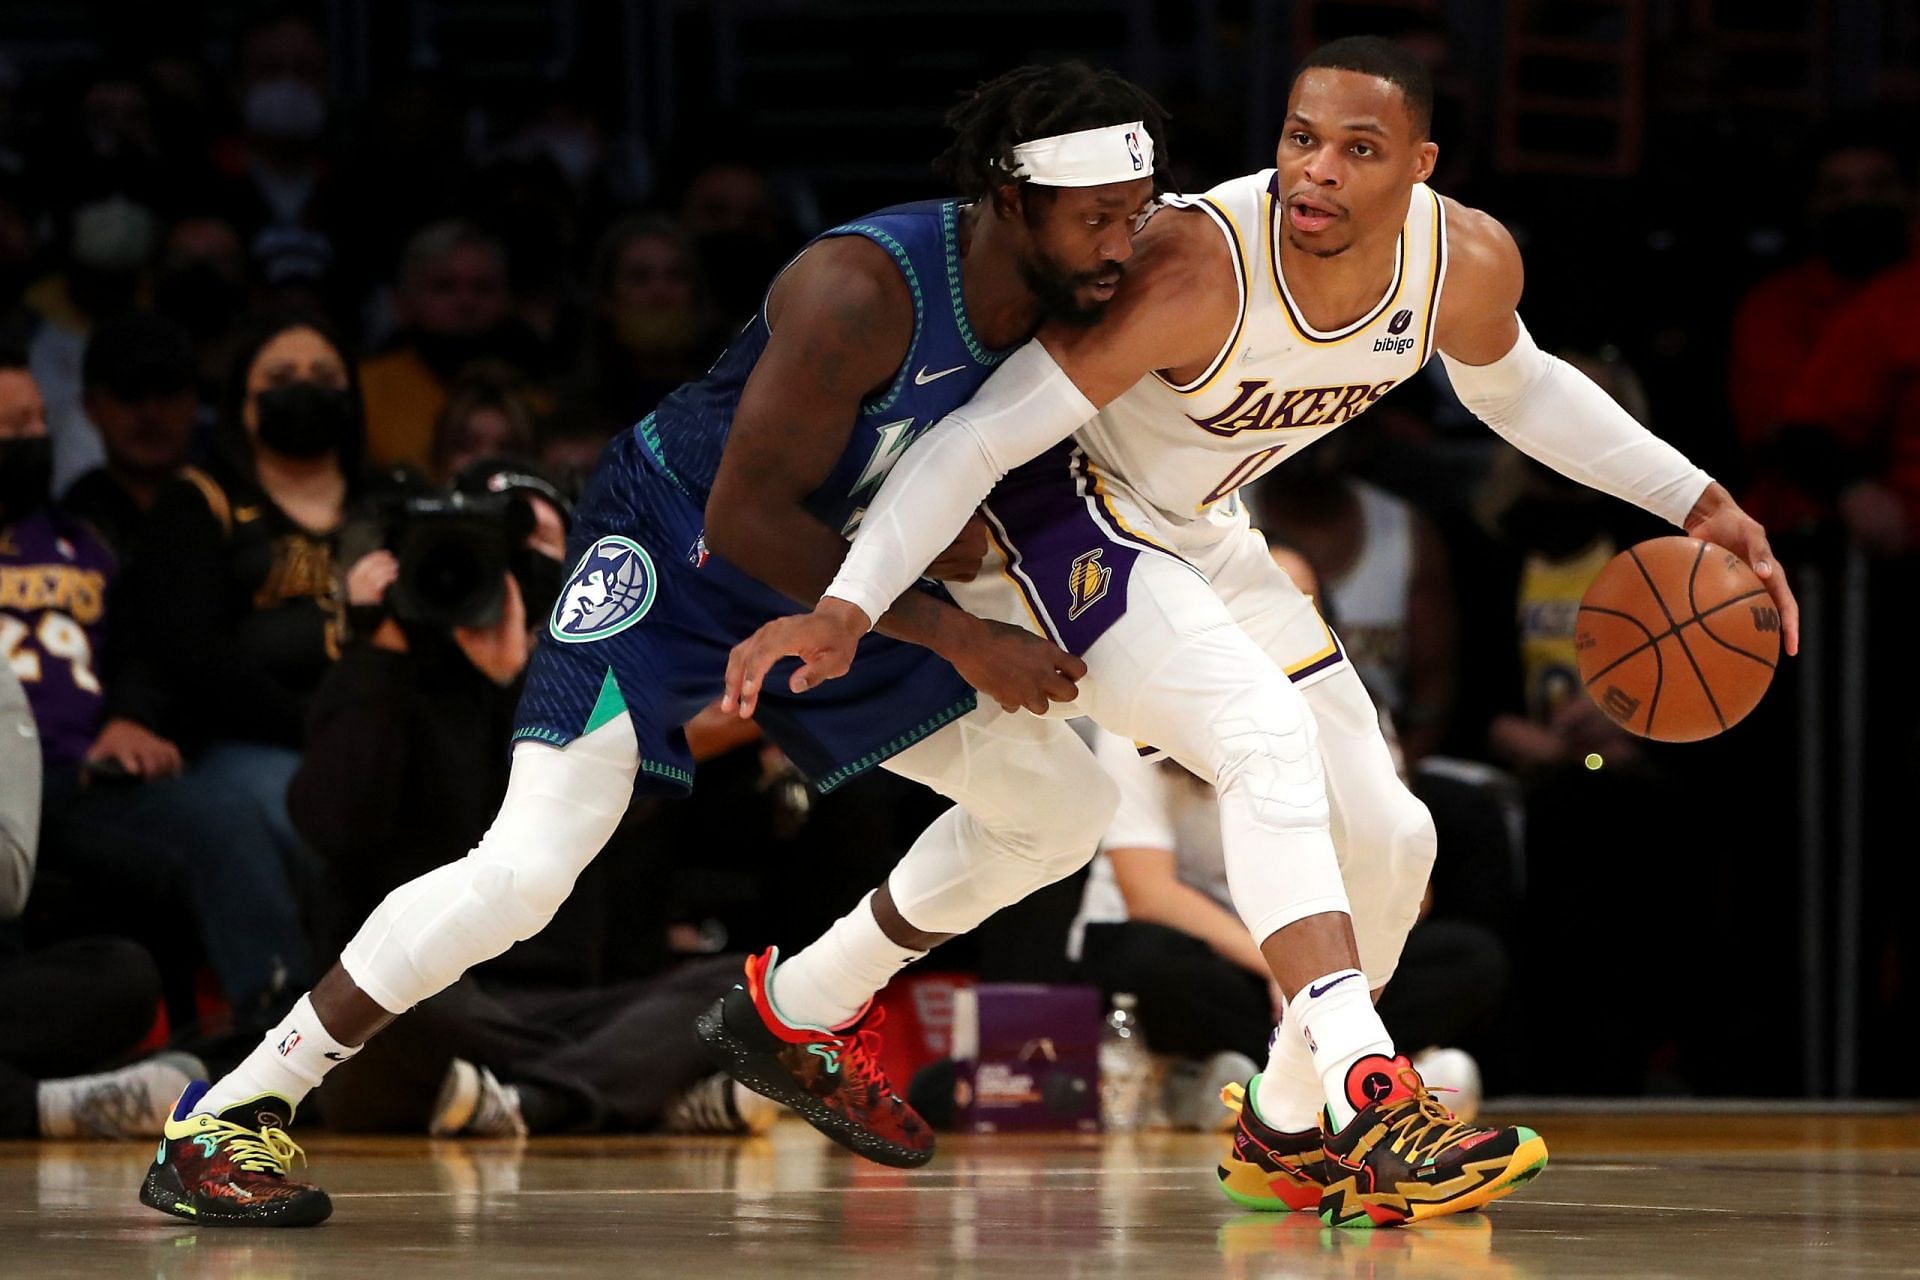 Russell Westbrook and Patrick Beverley in action [Photo source: Slam Online]